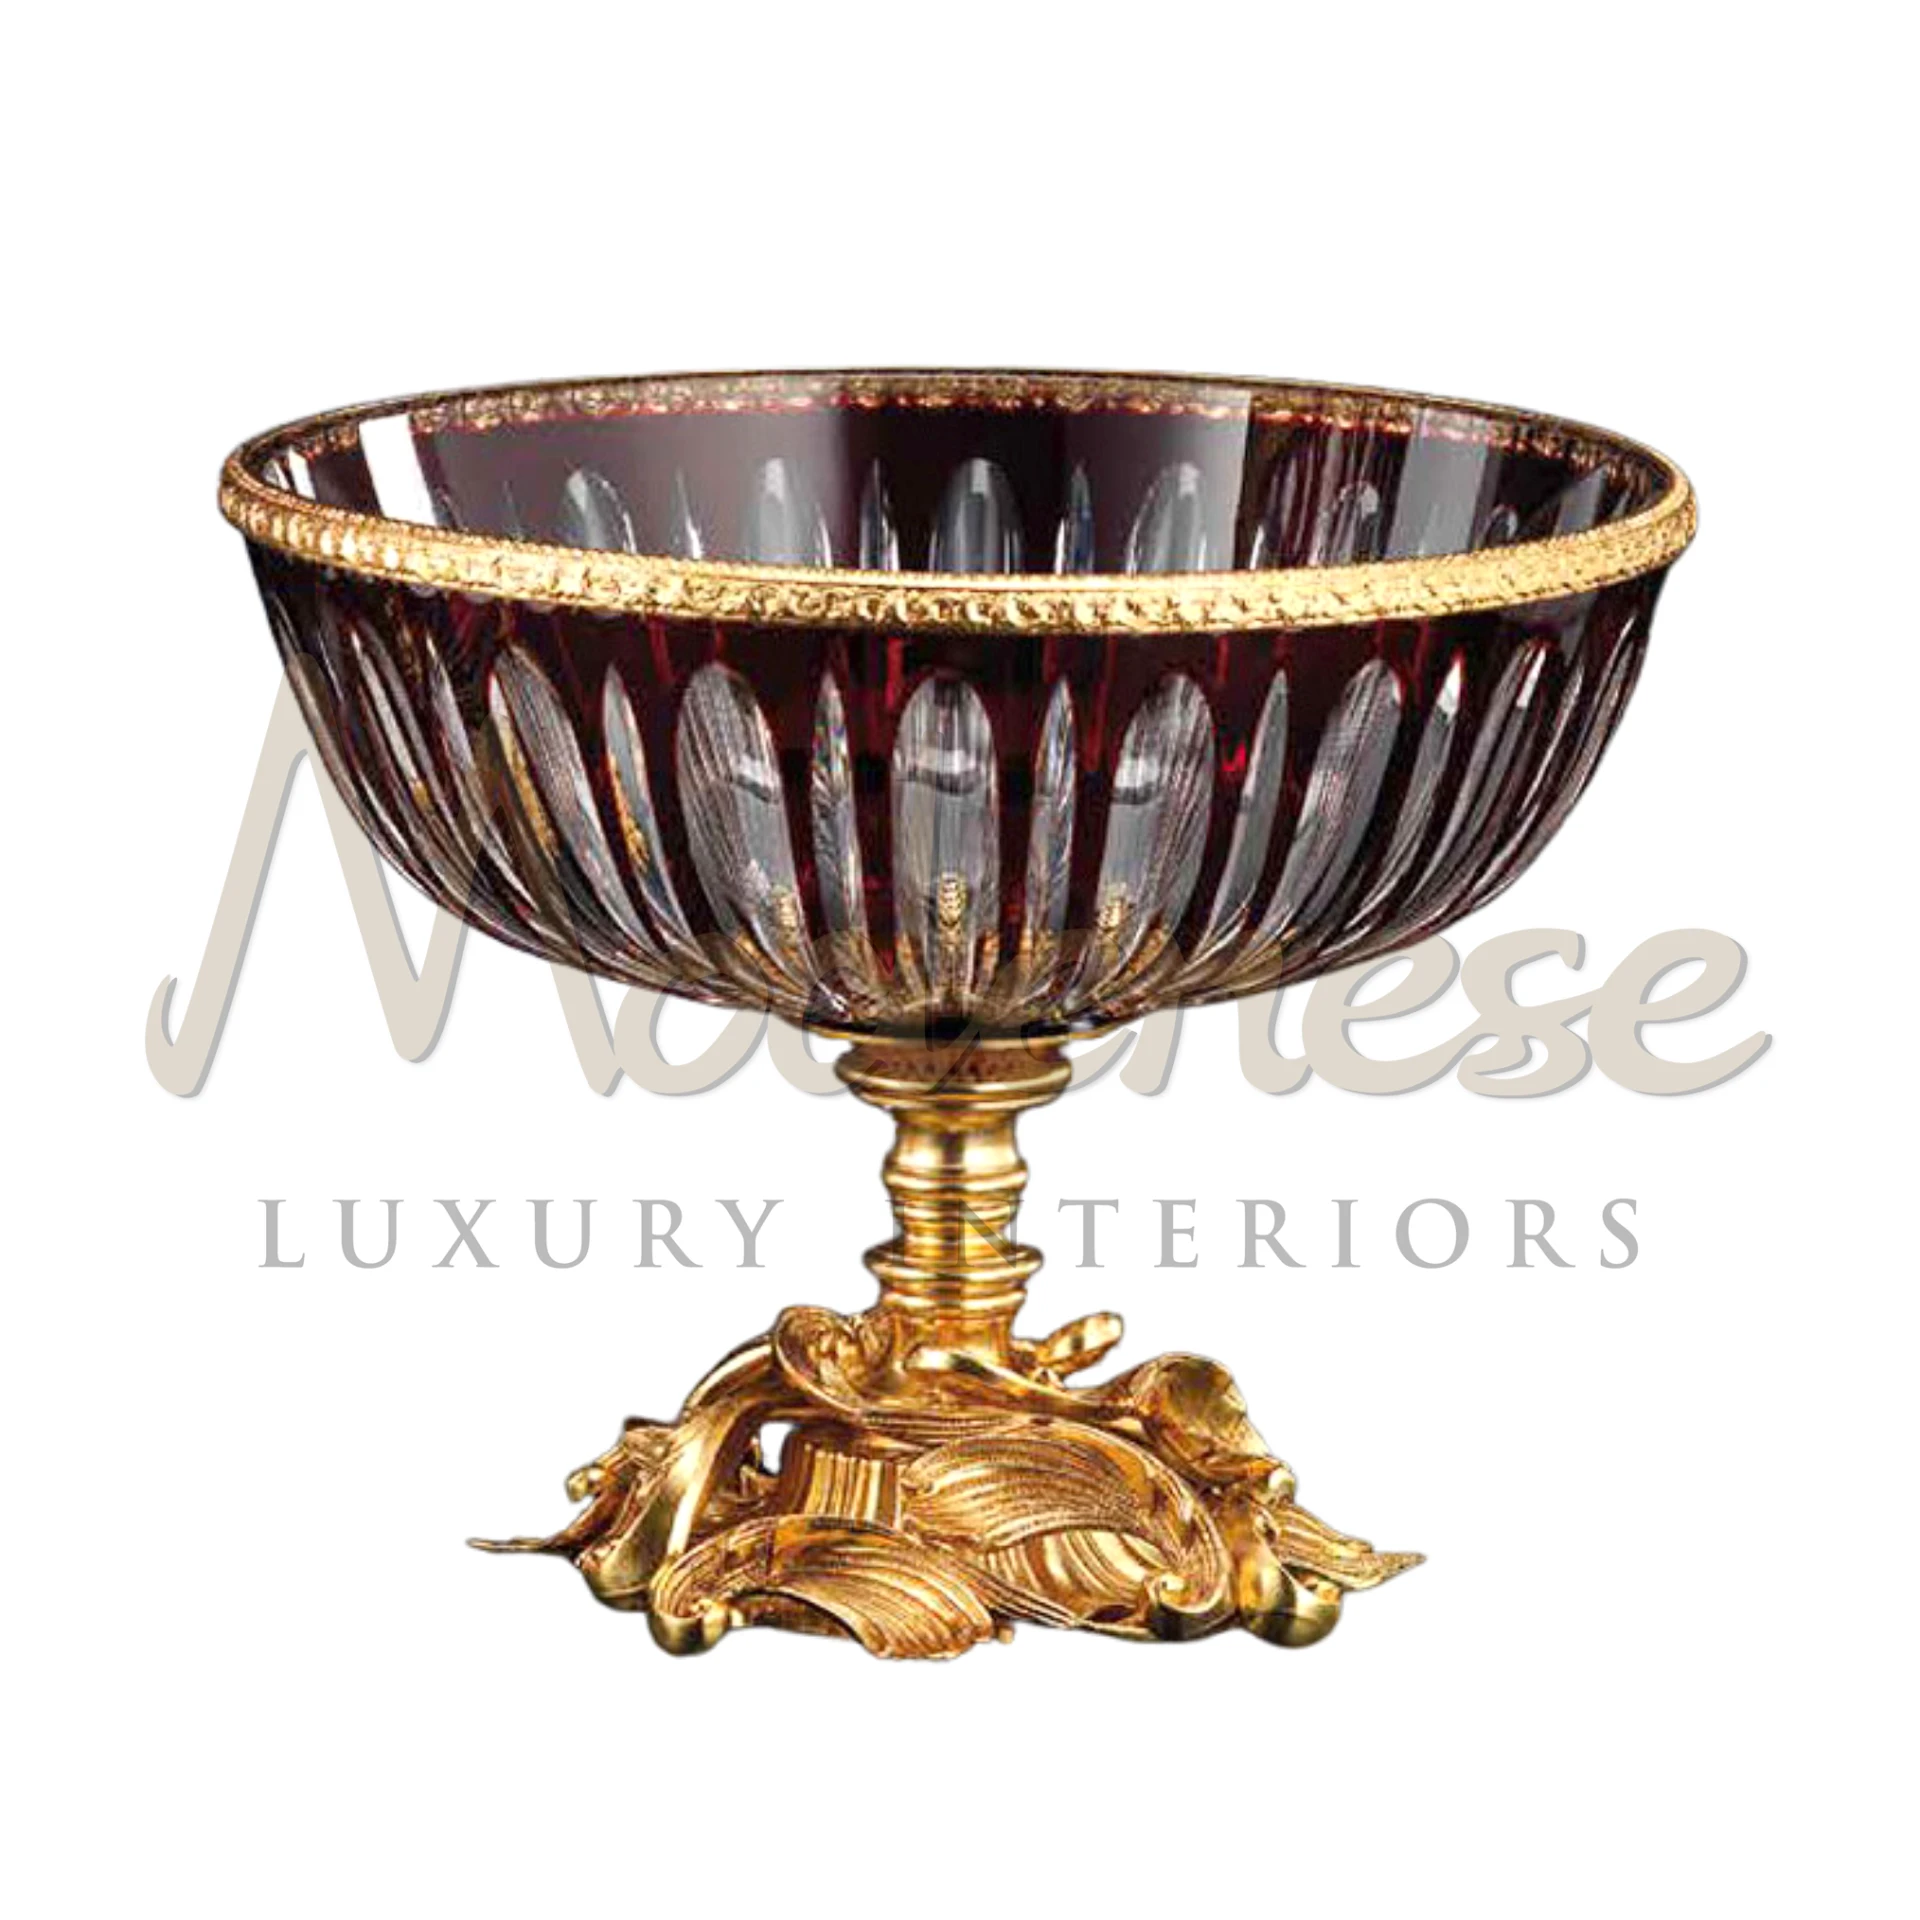 Regal Royal Dark Glass Bowl, showcasing luxury and sophistication in high-quality crystal, ideal for enhancing interior design with its rich color and unique style.